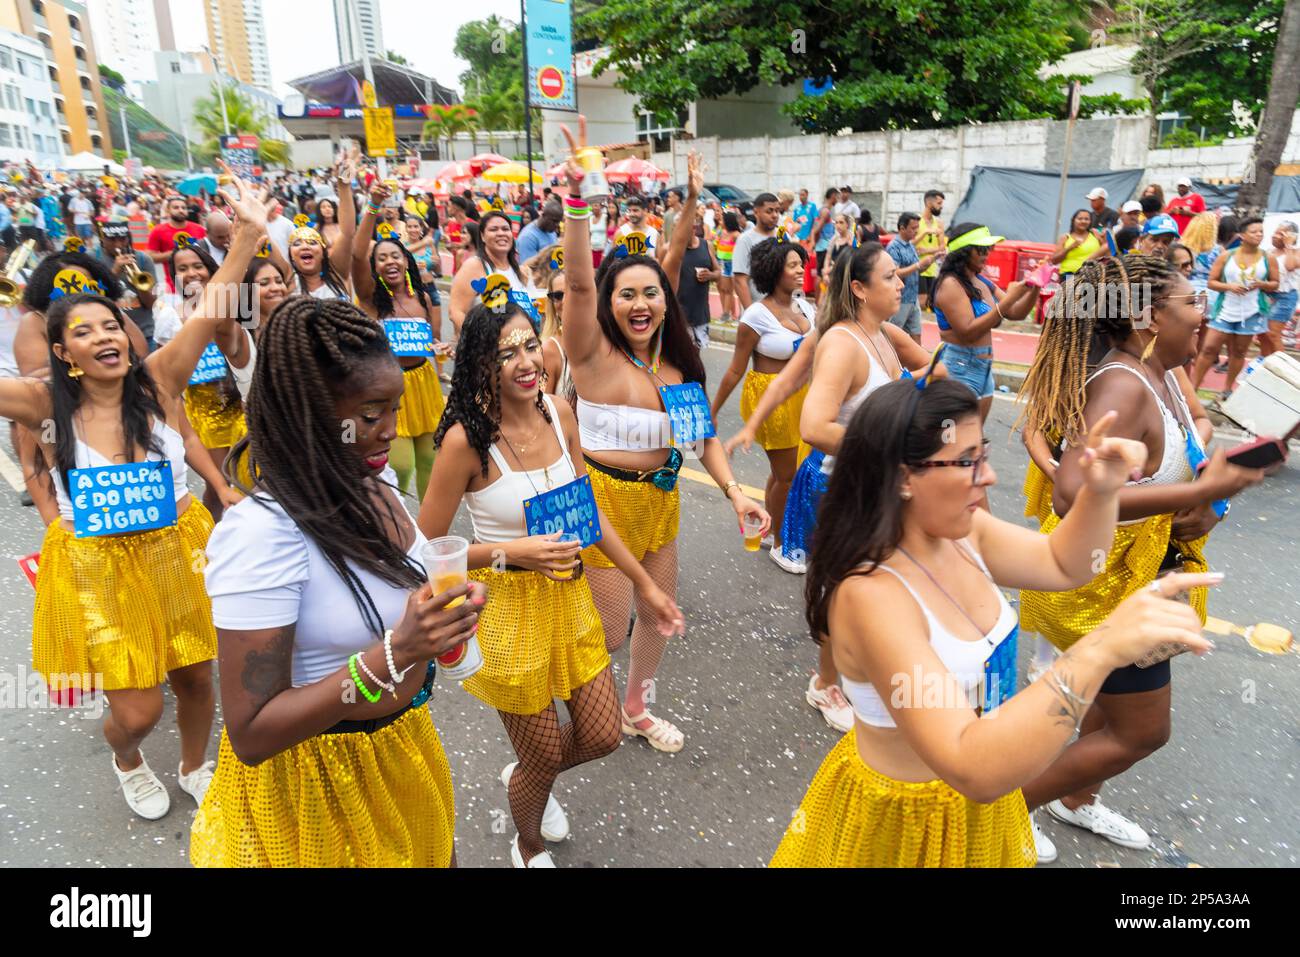 https://c8.alamy.com/comp/2P5A3AA/salvador-bahia-brazil-february-11-2023-women-parade-in-character-at-the-carnival-called-fuzue-in-the-city-of-salvador-bahia-2P5A3AA.jpg